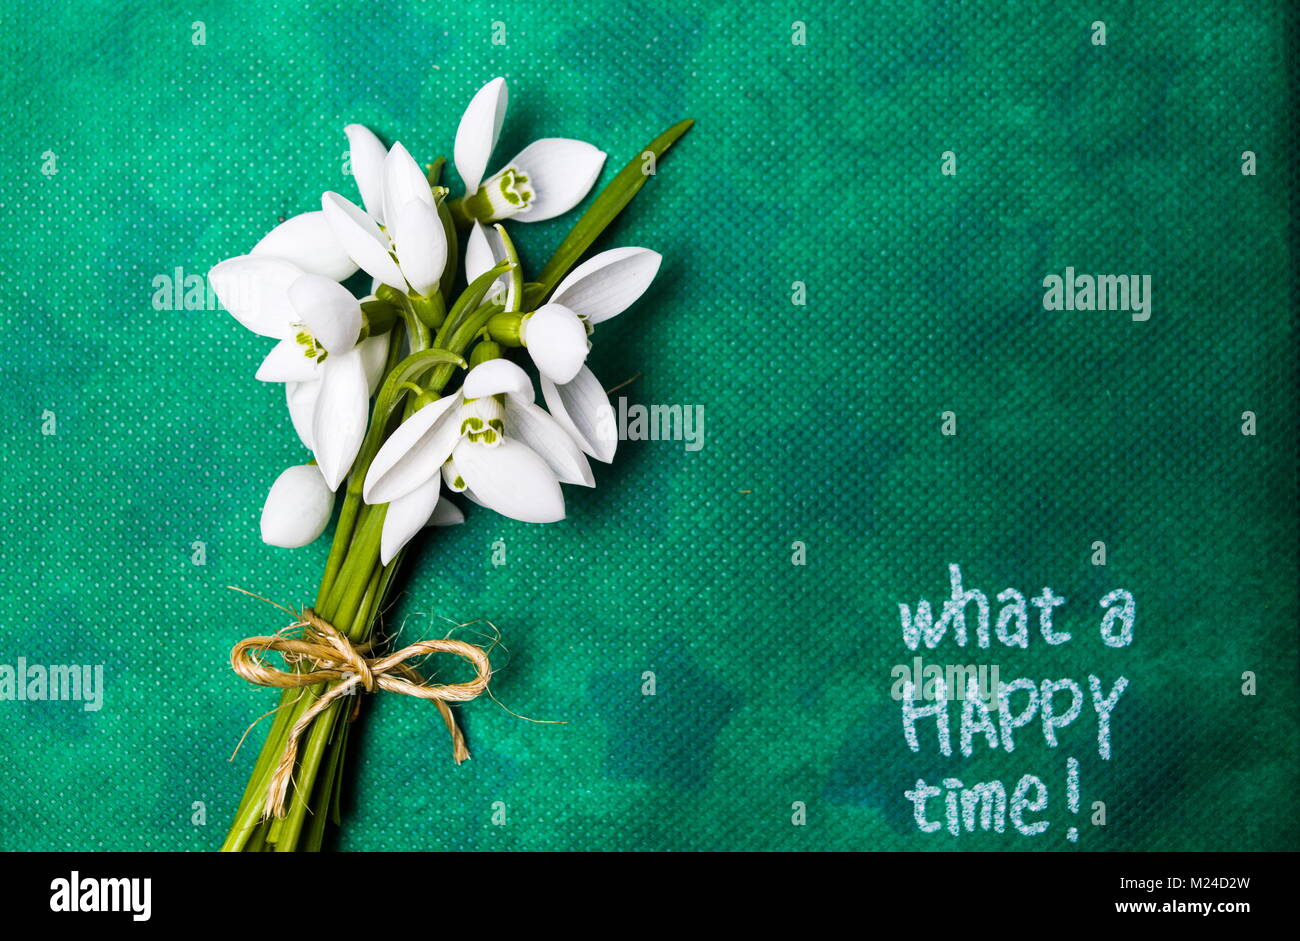 Snowdrop flowers and Happy time note on green background Stock Photo